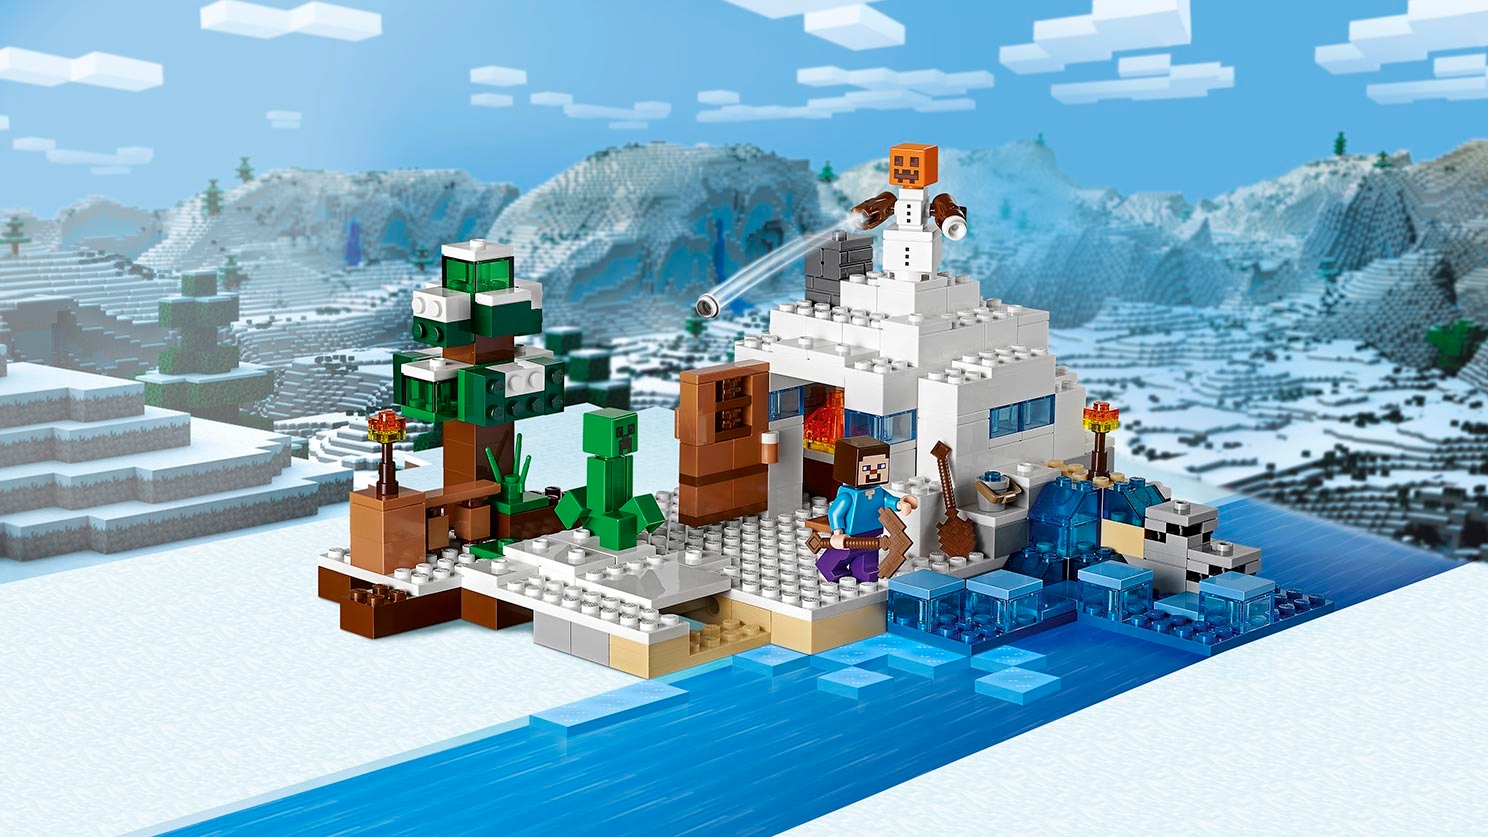 The Snow Hideout 21120 - LEGO® Minecraft™ Sets - LEGO.com for kids